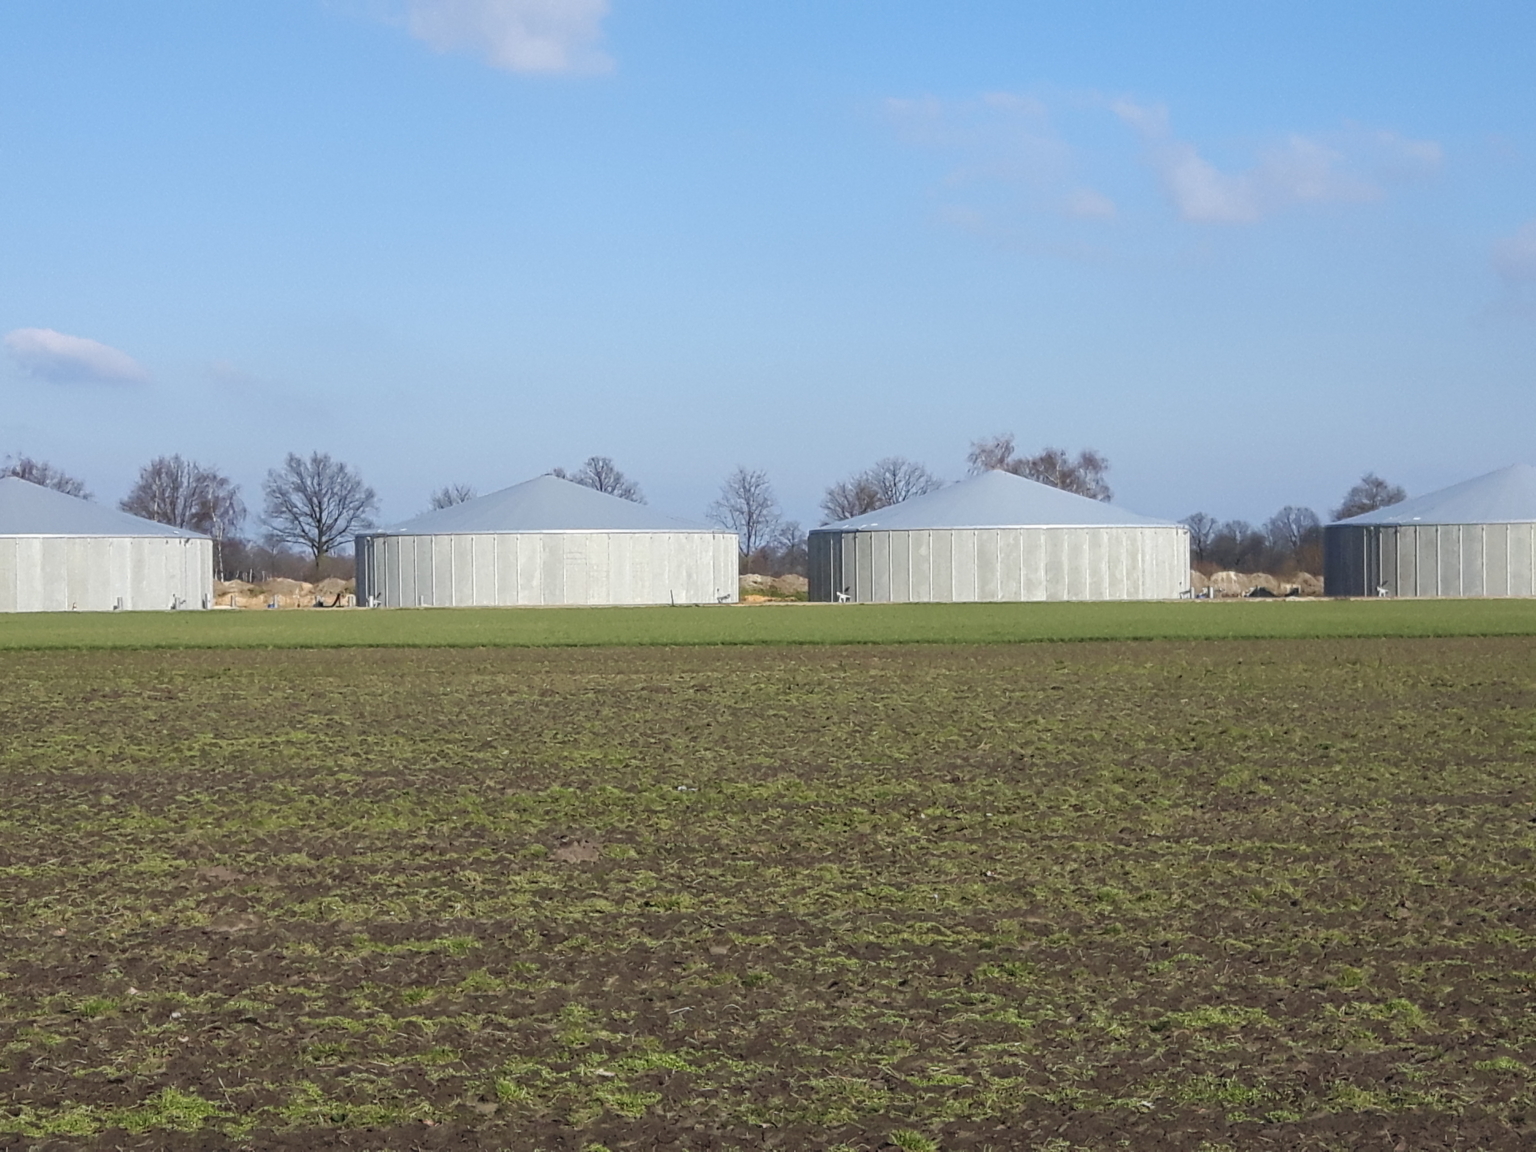 Four concrete silos with tensioned covers